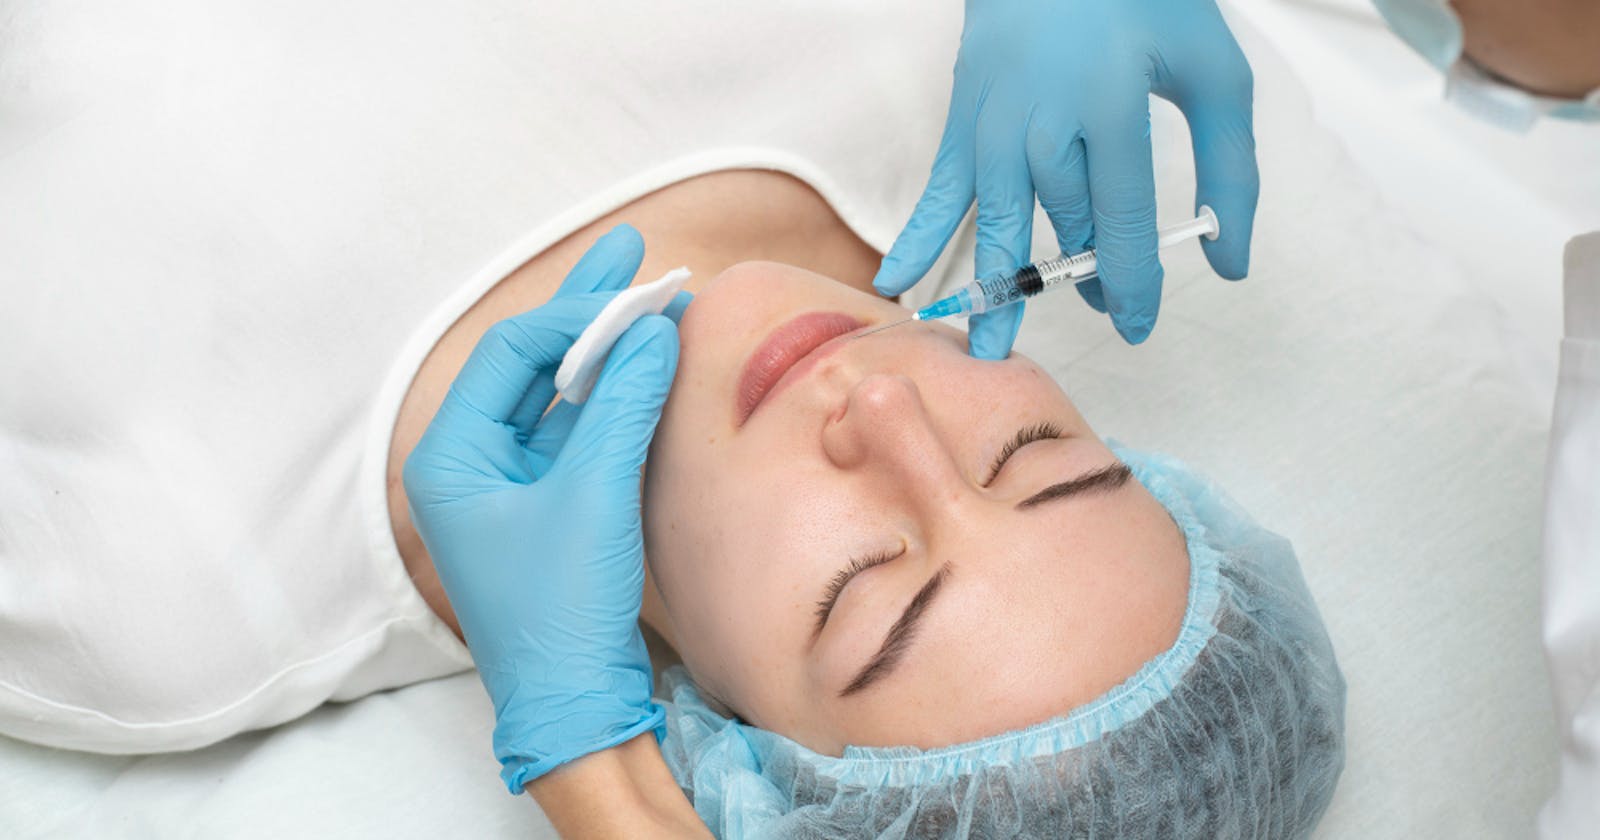 The Benefits of Botox: How it Can Help You Look and Feel Your Best